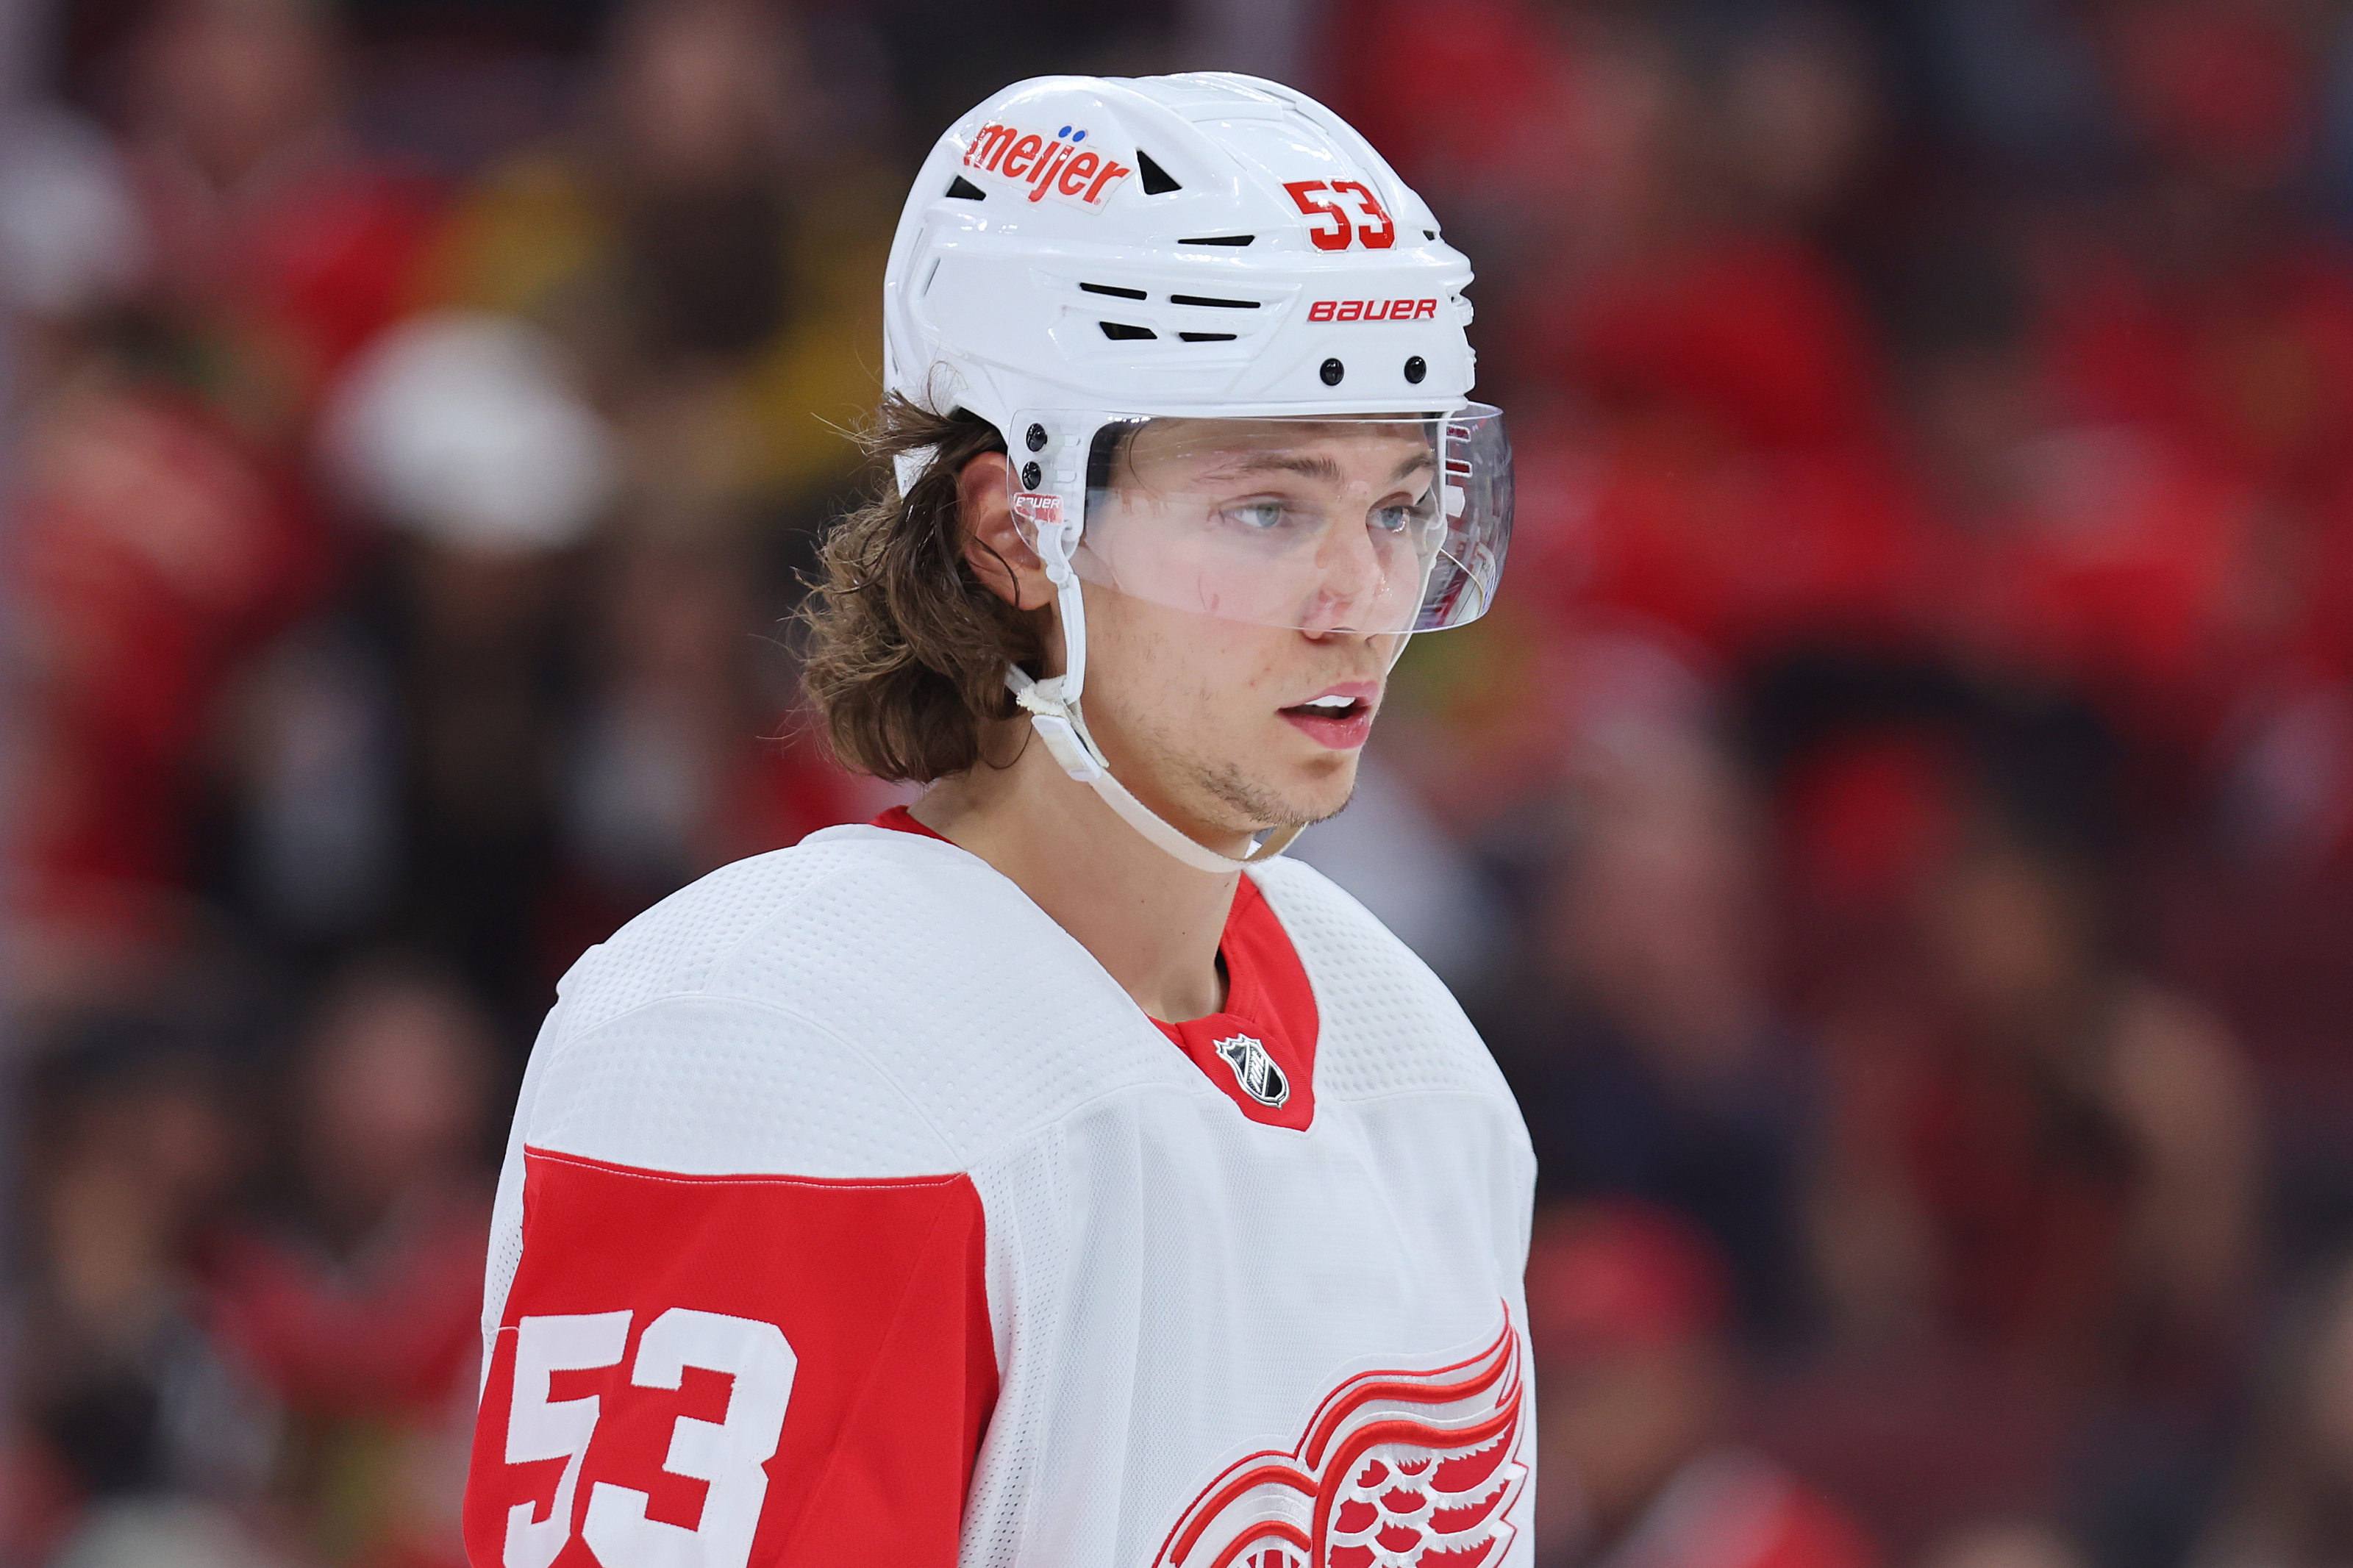 How the Red Wings' Moritz Seider's audacity and maturity led him